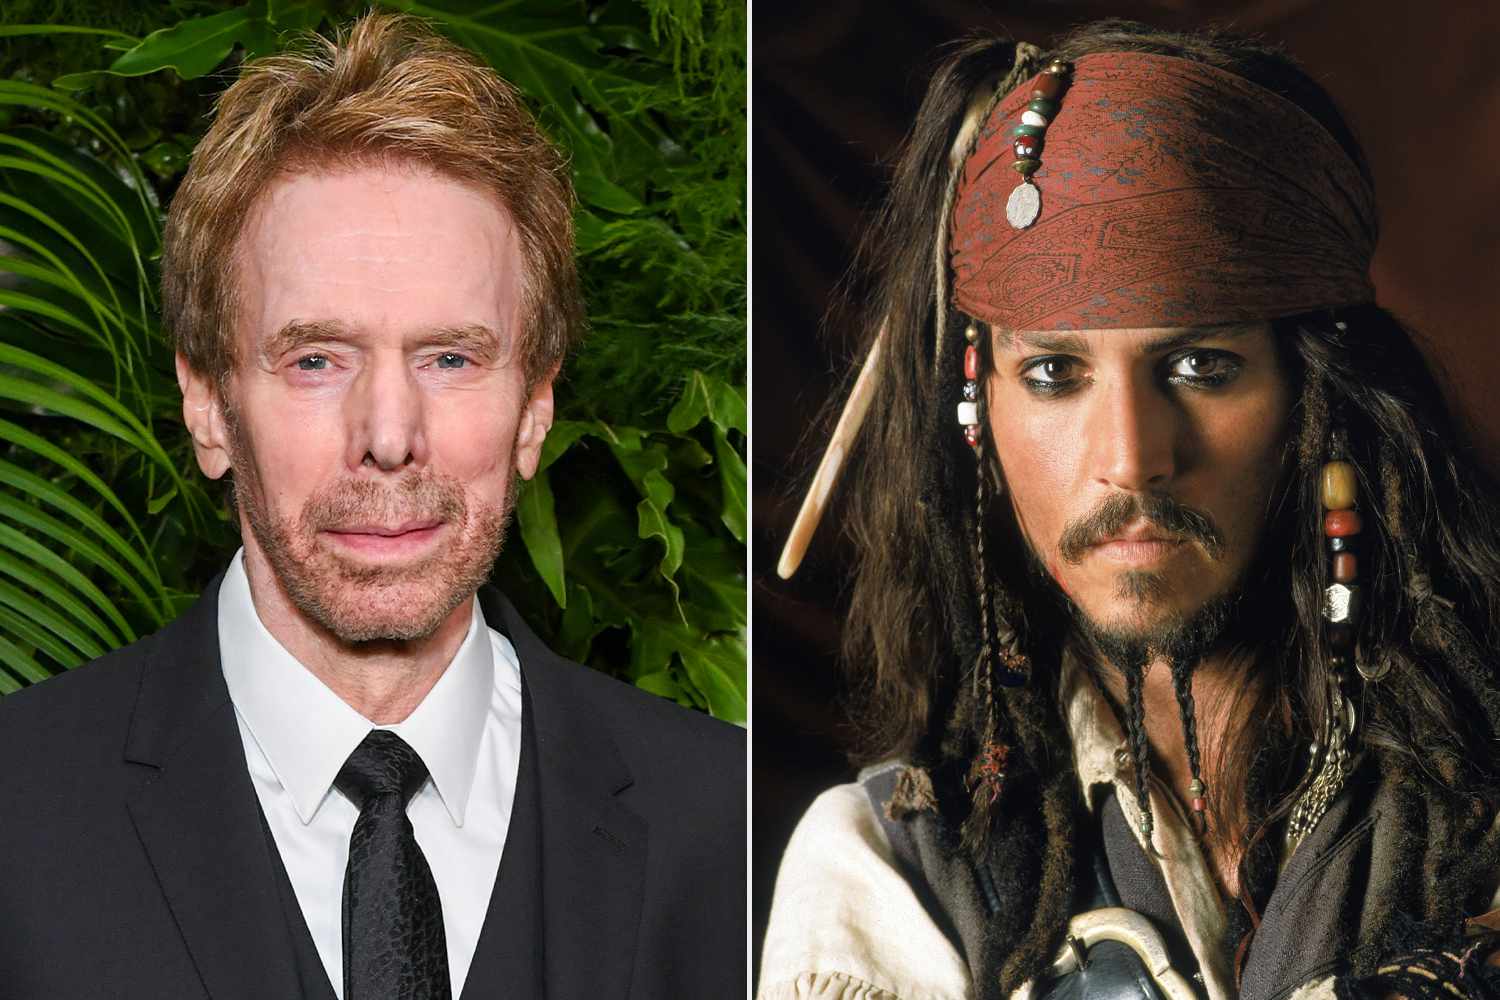 Johnny Depp Would Be in Next Pirates Movie 'If It Was Up to Me,' Says Producer Jerry Bruckheimer